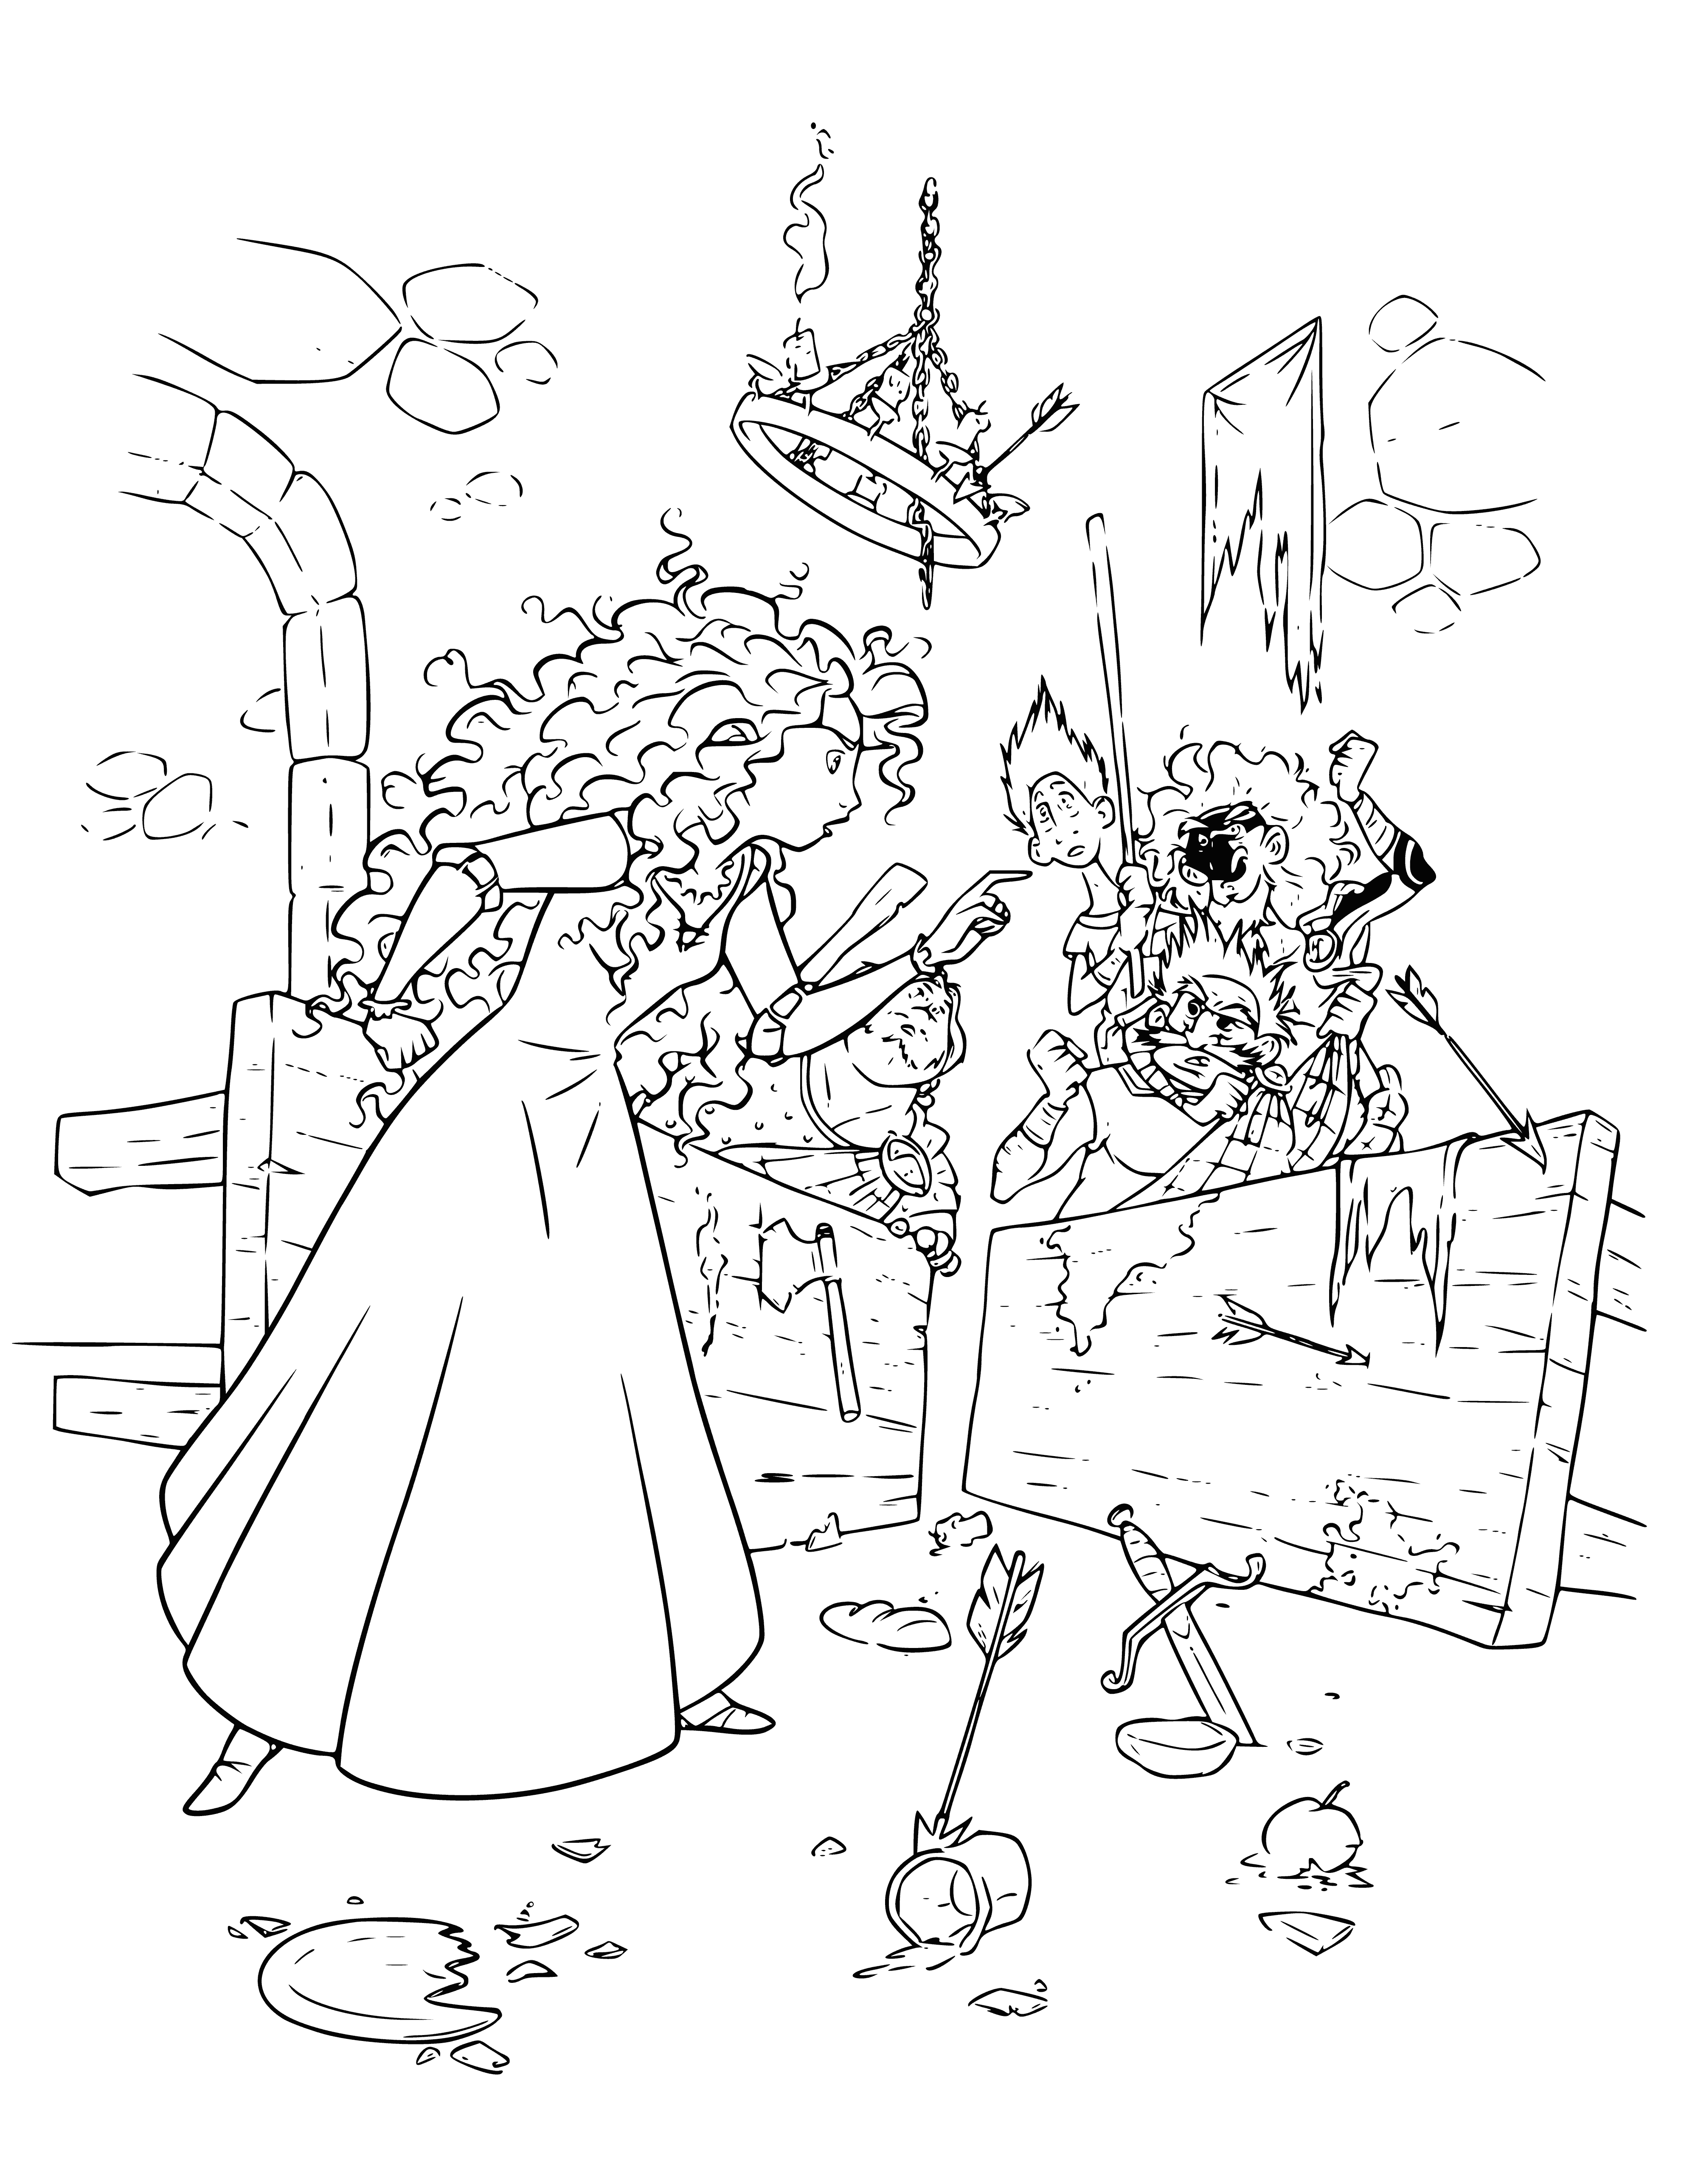 coloring page: Princess Merida, surrounded by four angry lords, stands resolute in front of a hearth. Her calm, determined expression is met with varying reactions by the lords.